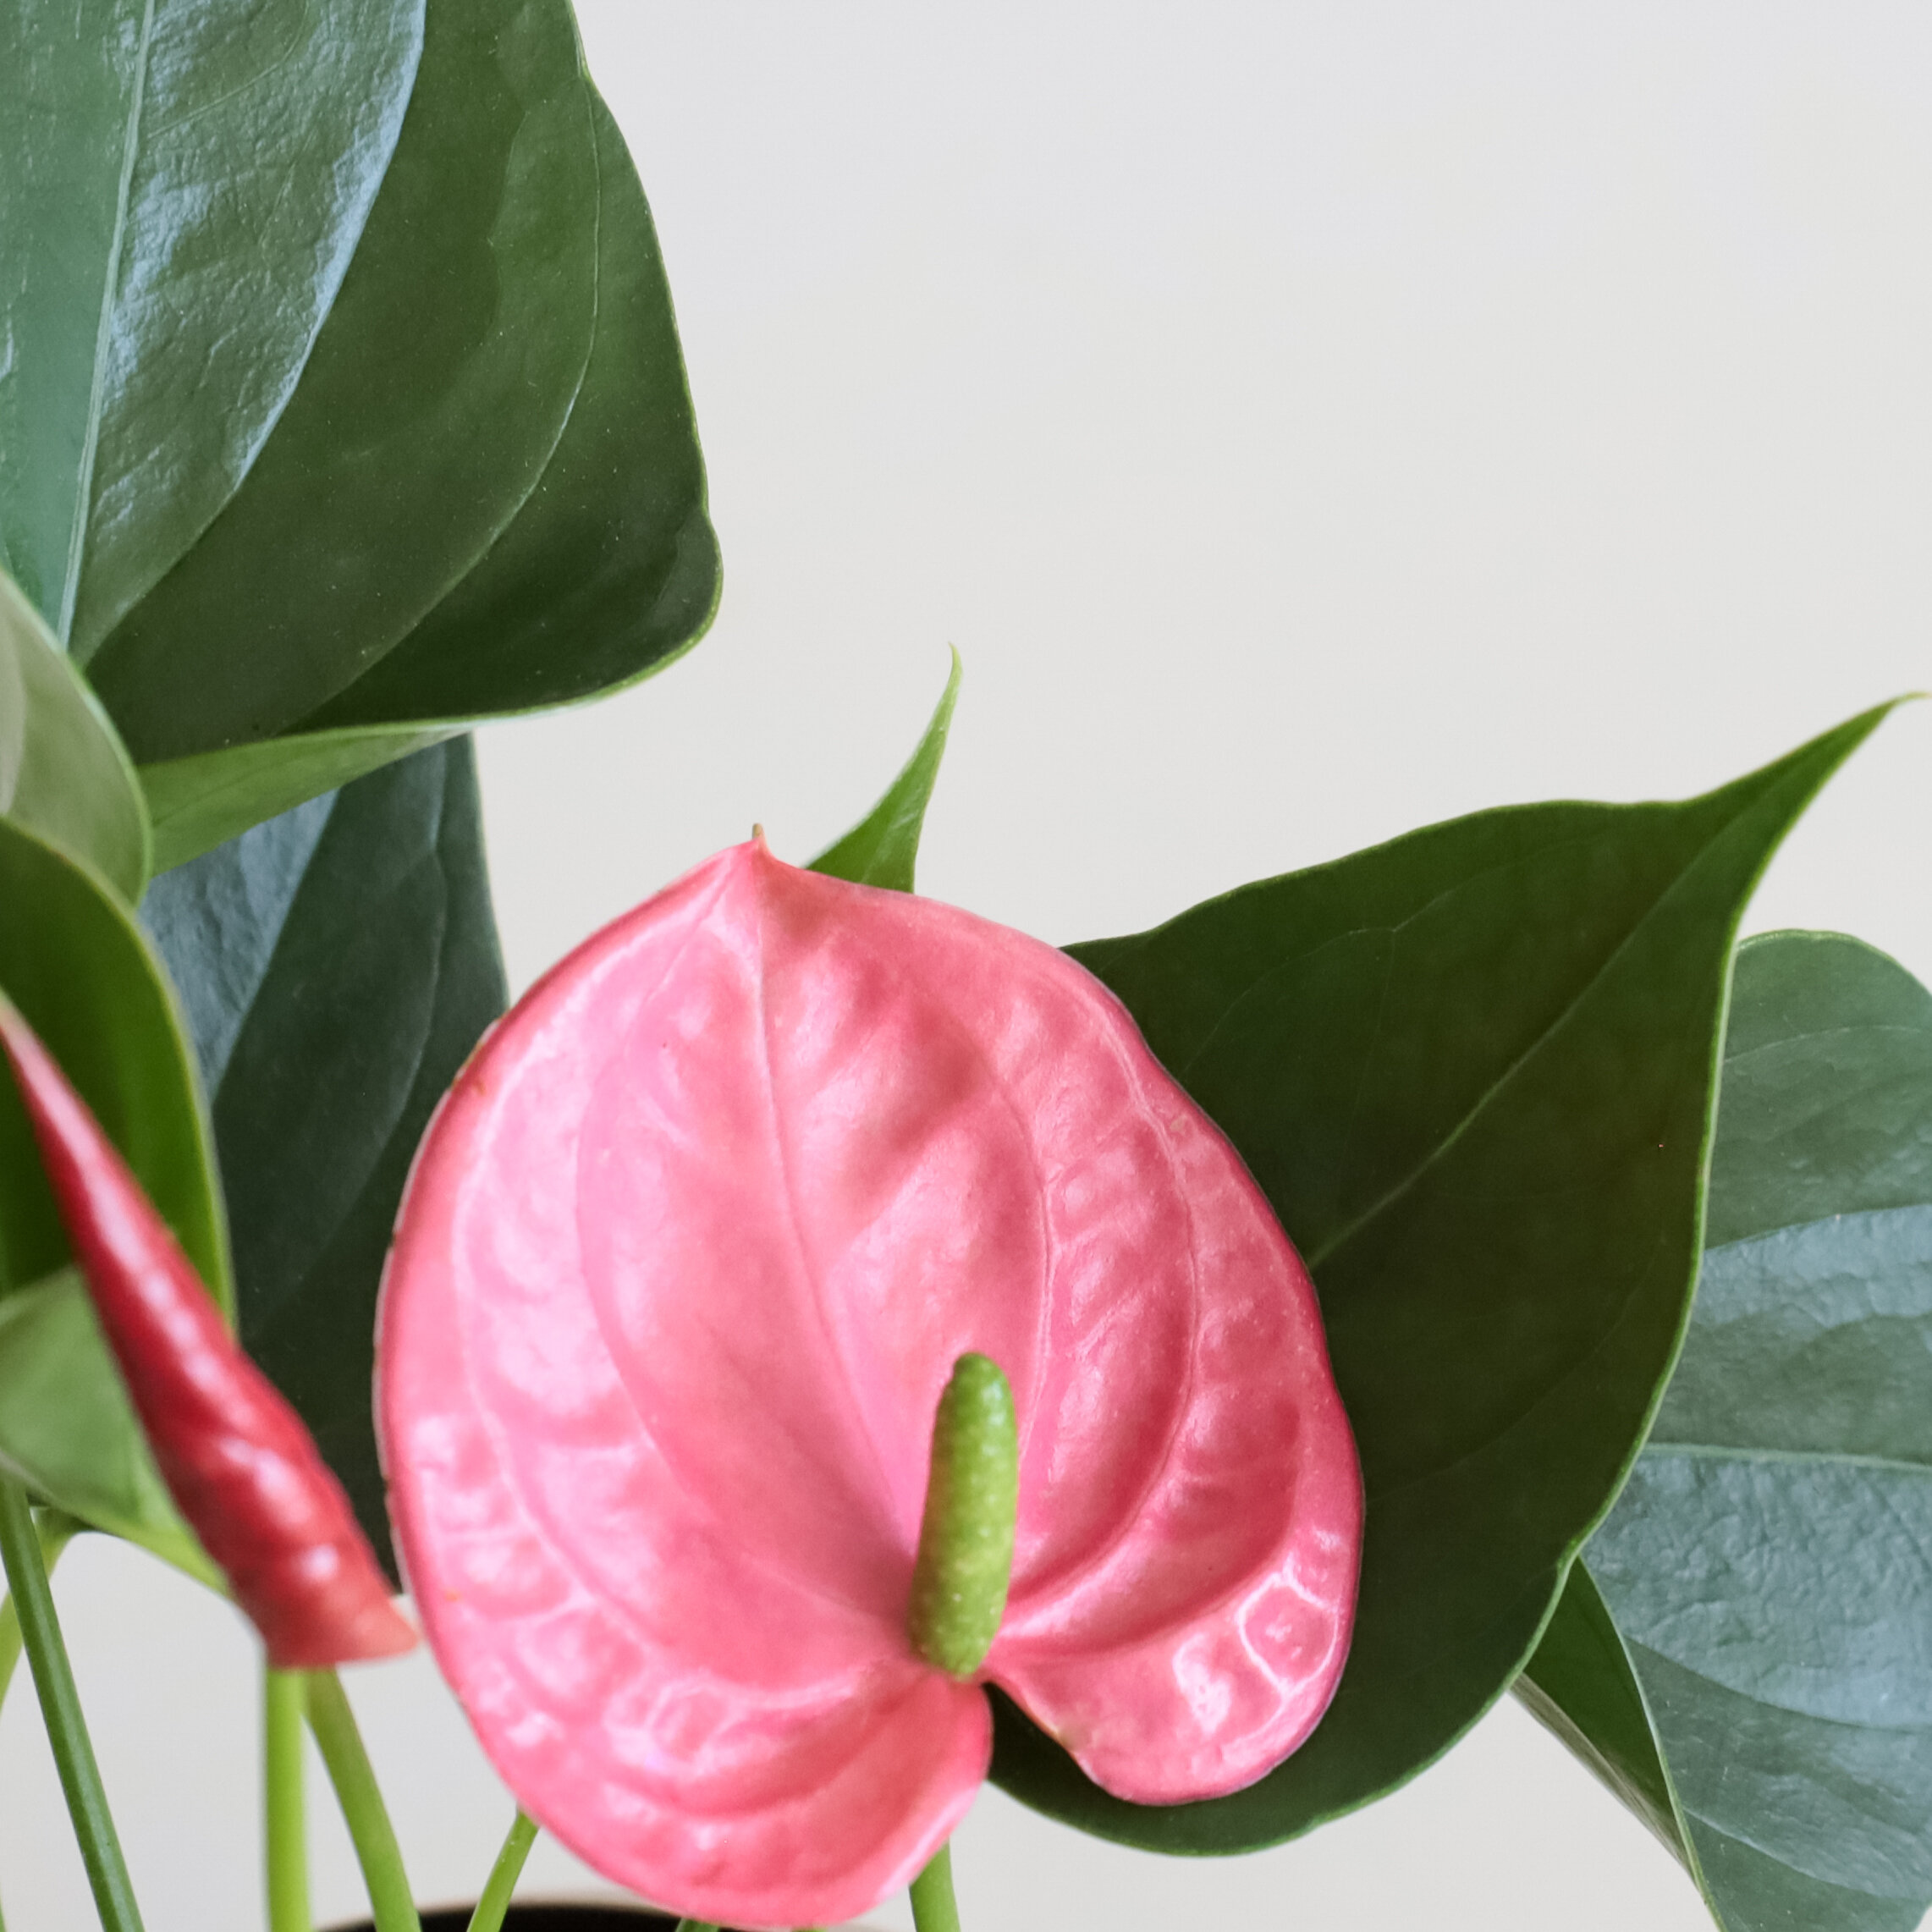 A close up of Anthurium pink and green leaves